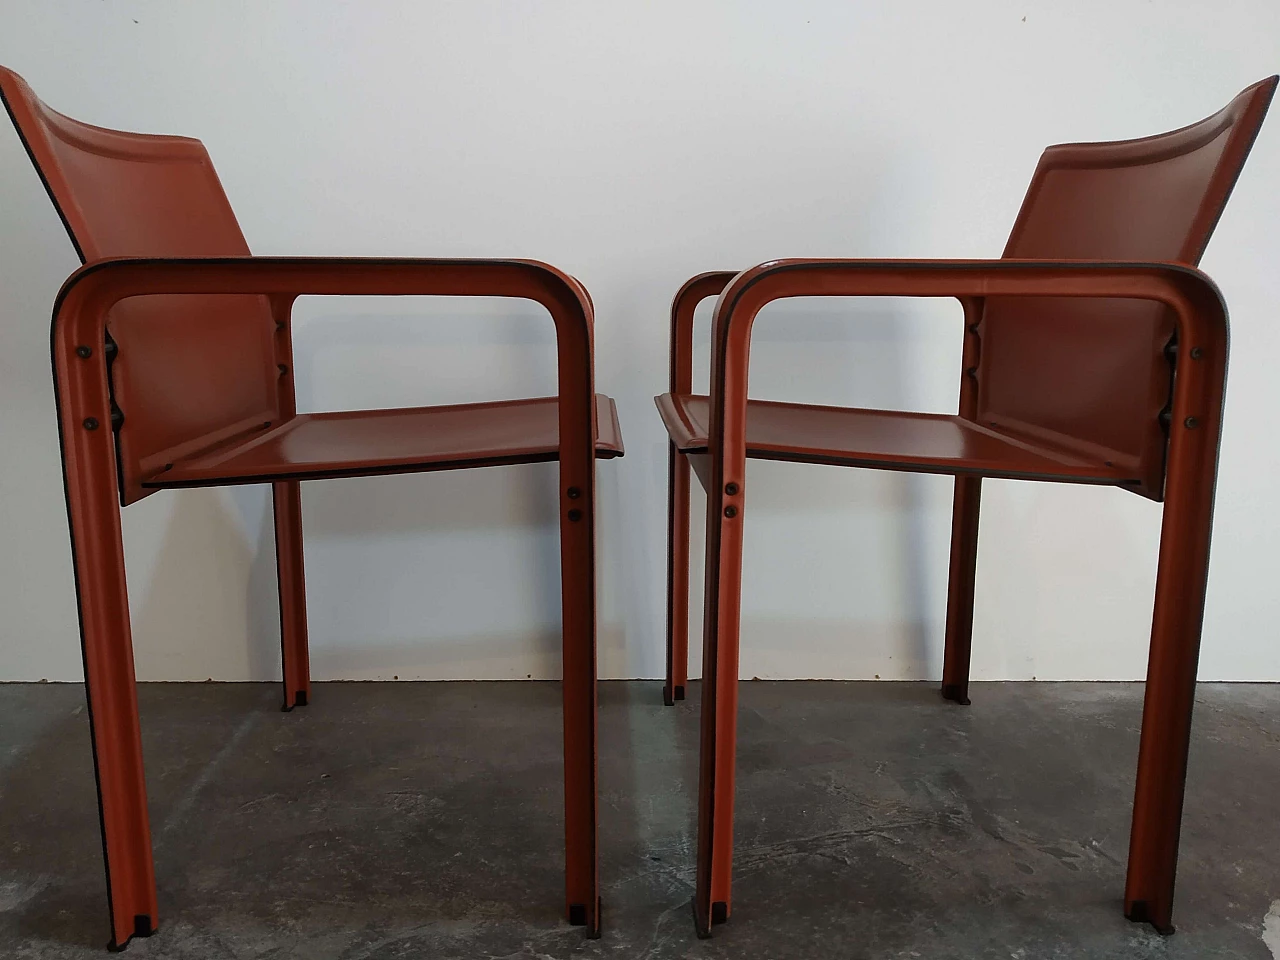 Pair of Golfo dei Poeti chairs by Toussaint & Angeloni manufactured by Matteo Grassi, 1980s 59